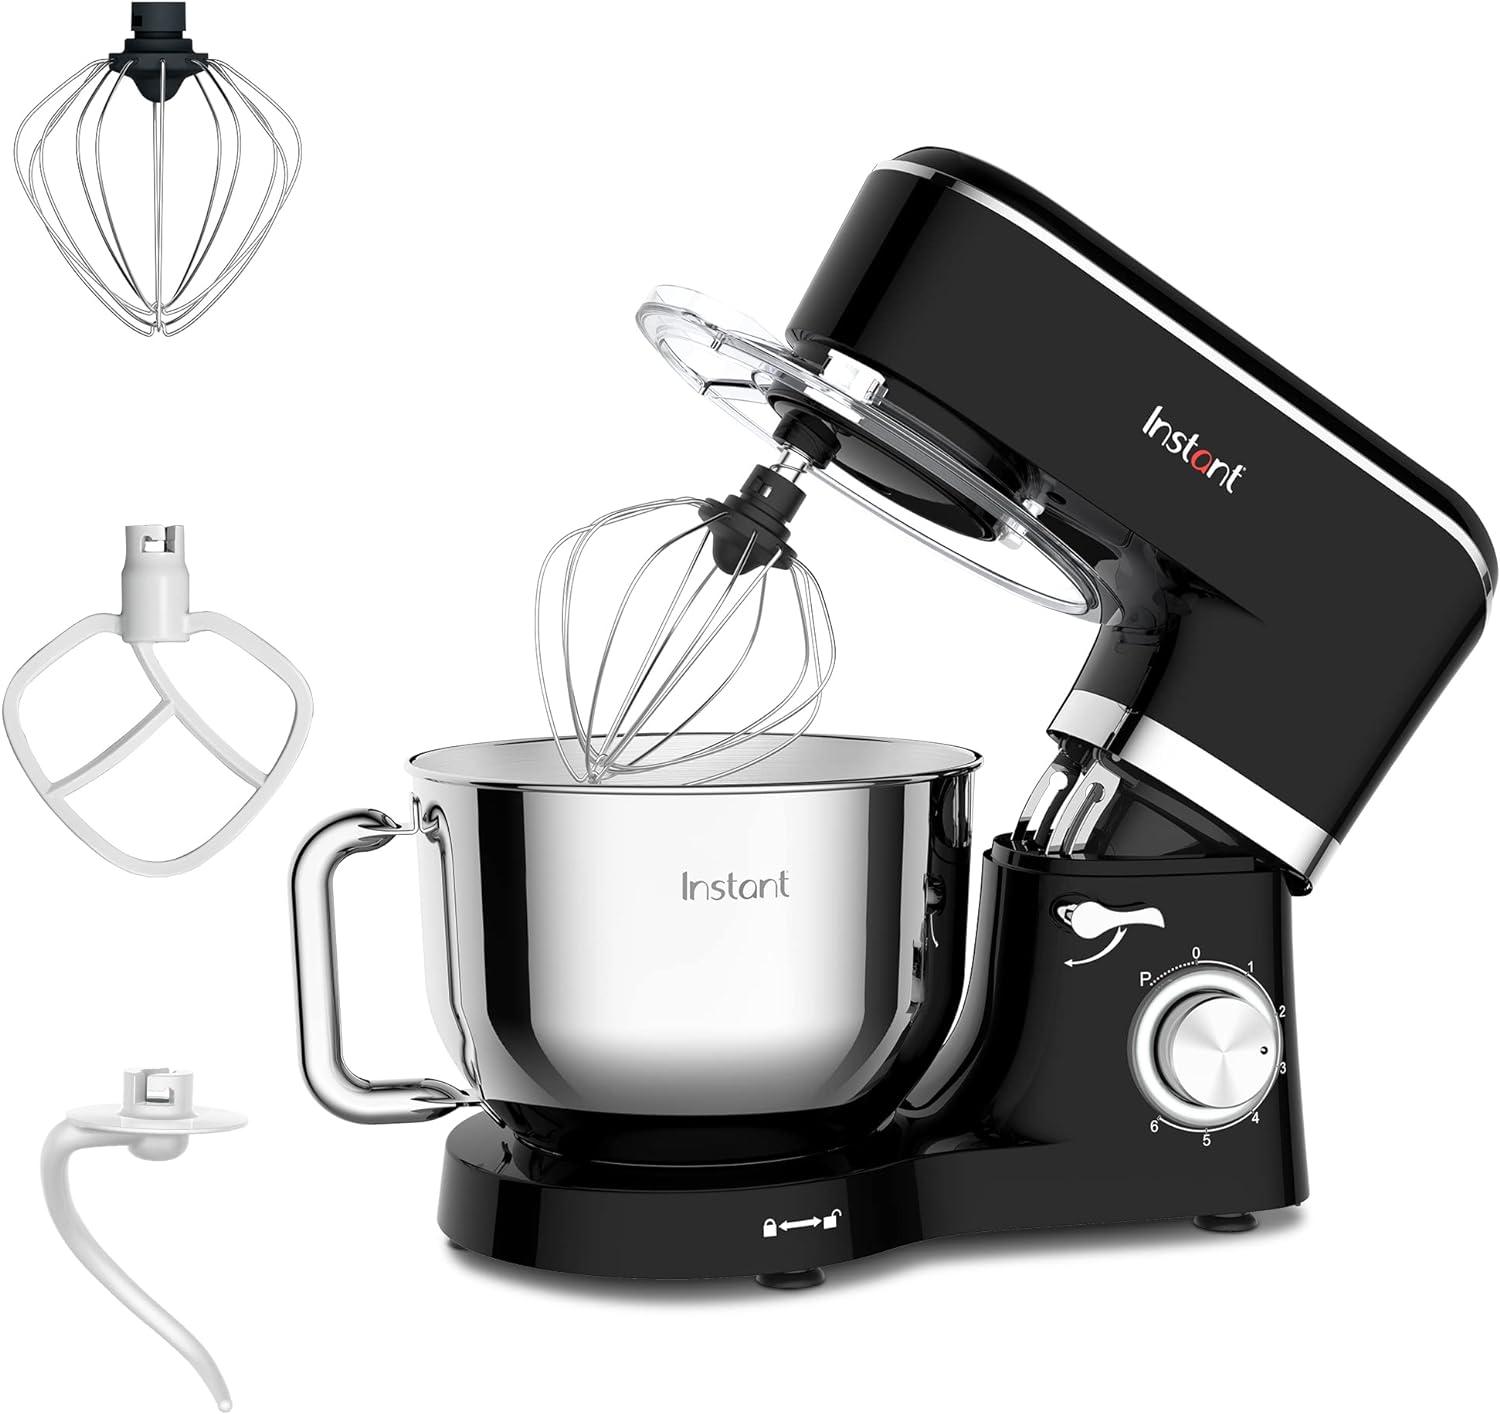 Instant 400w 6-Speed Lightweight Stand Mixer for $79.99 Shipped